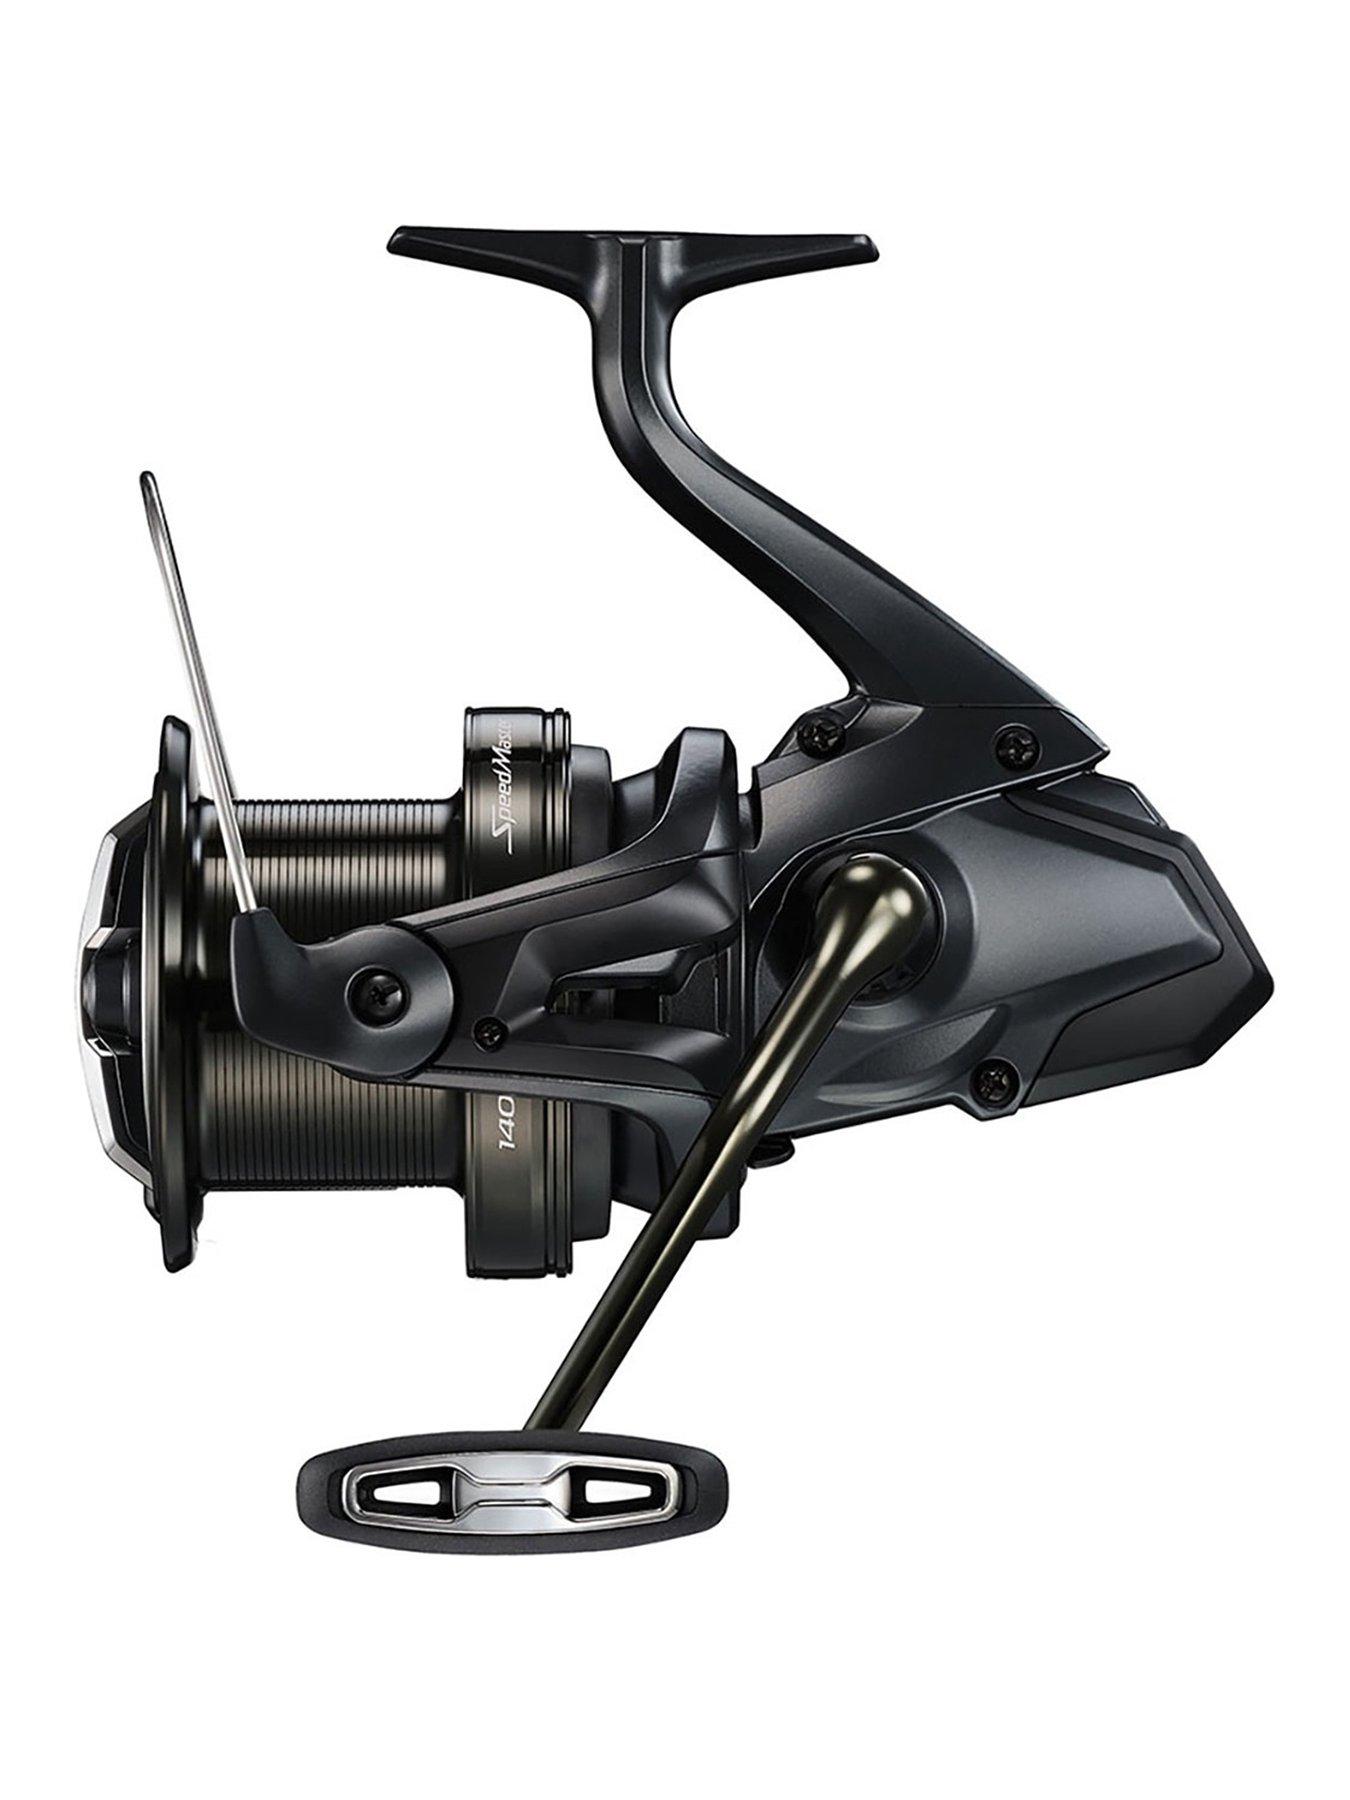 Prologic Element Reel: Redefining Your Fishing Experience